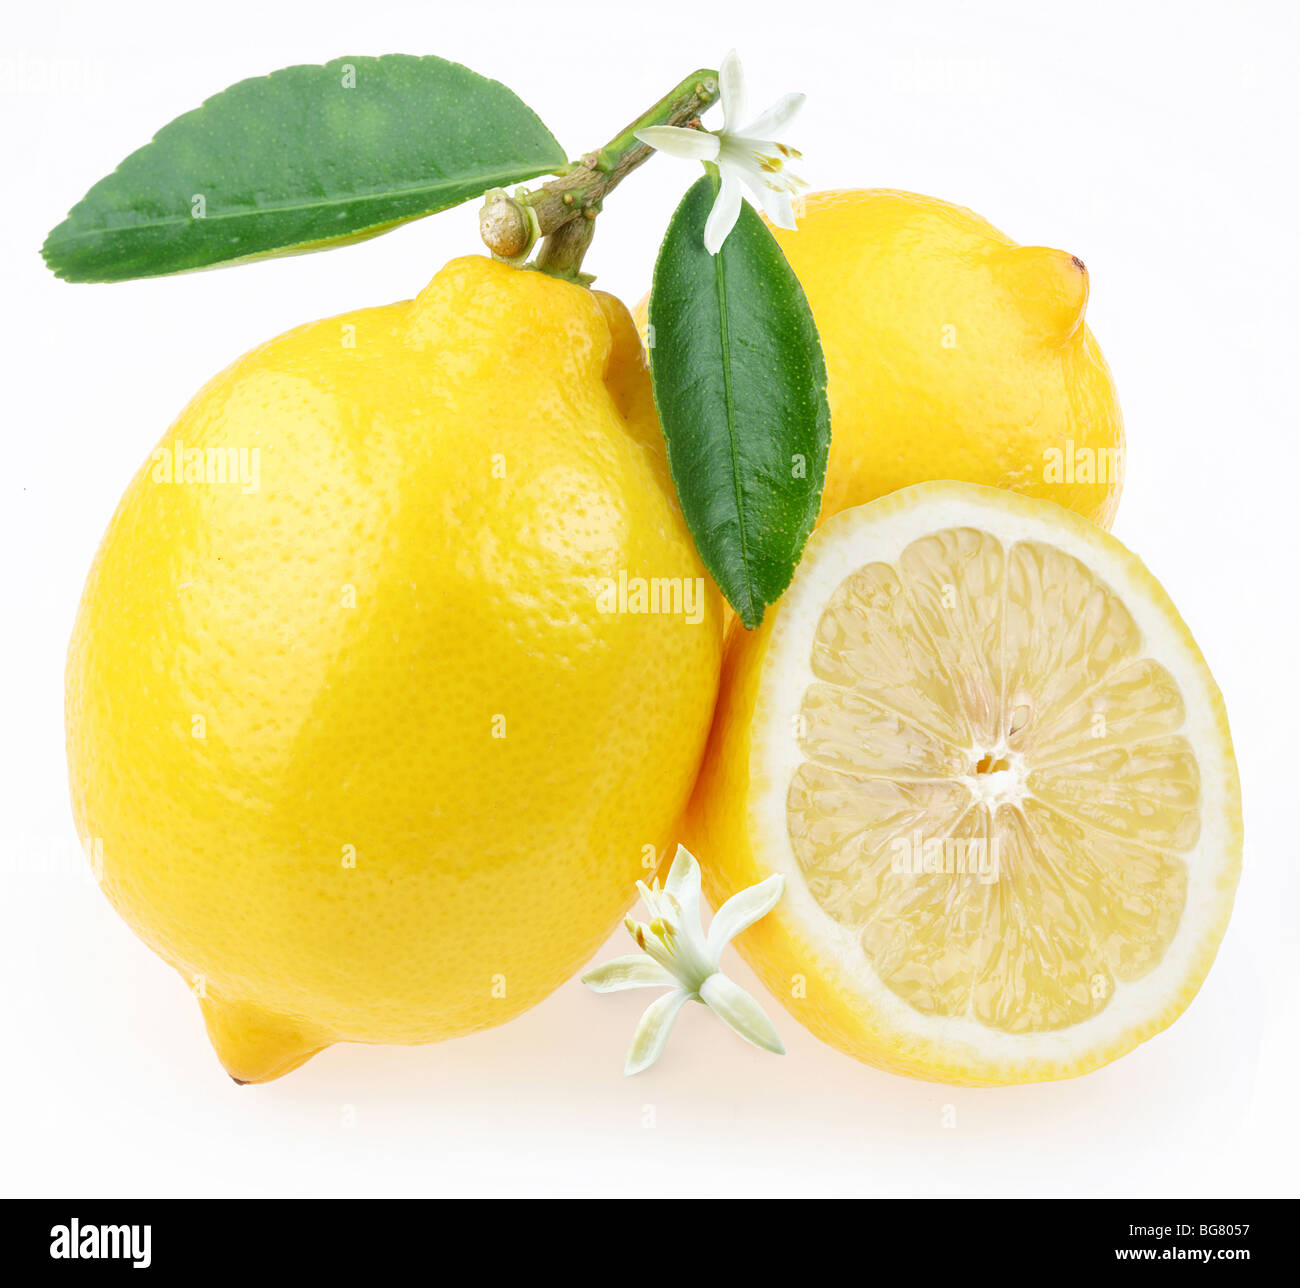 Lemon with section on a white background Stock Photo